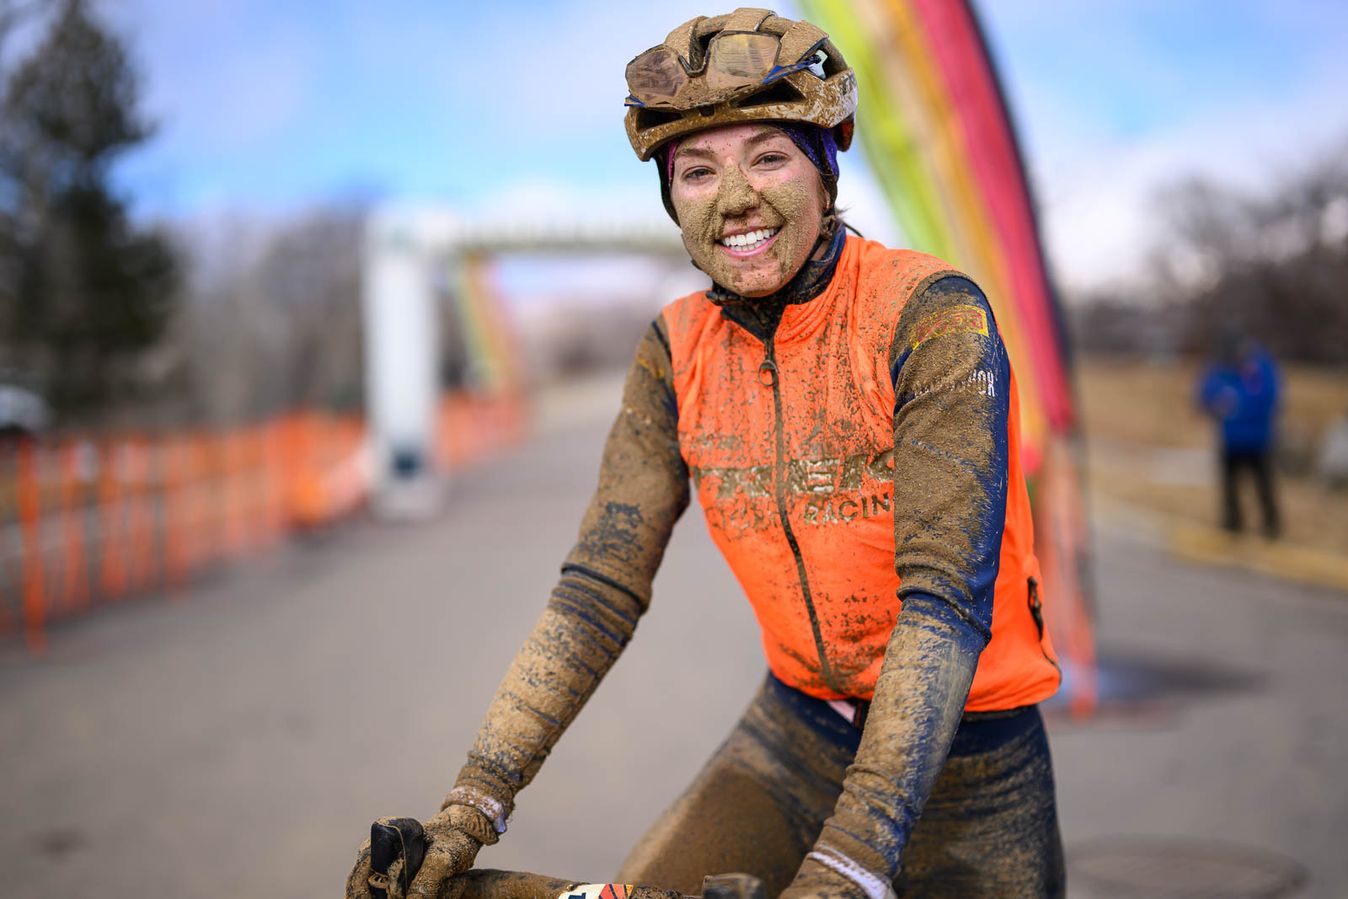 In the women's race, it was U23 cross-country mountain bike national champion Madigan 'Maddie' Munro who took the solo win 